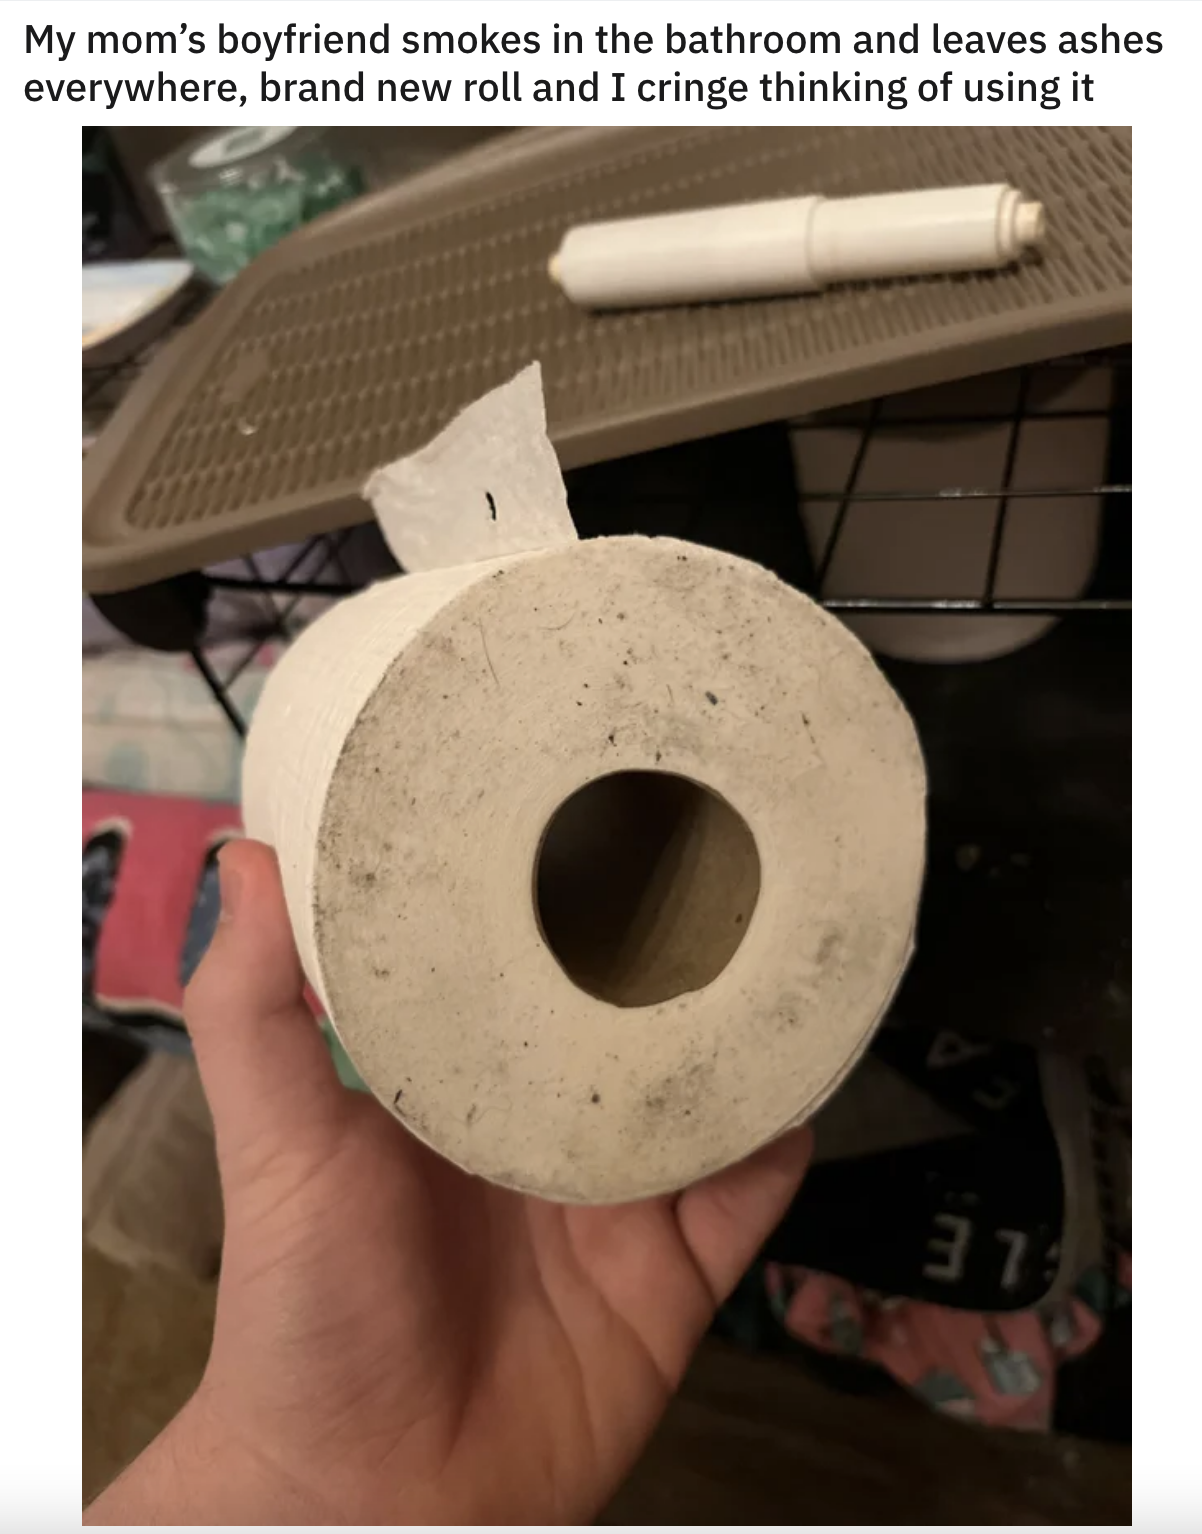 A roll of toilet paper with ash on the side of it